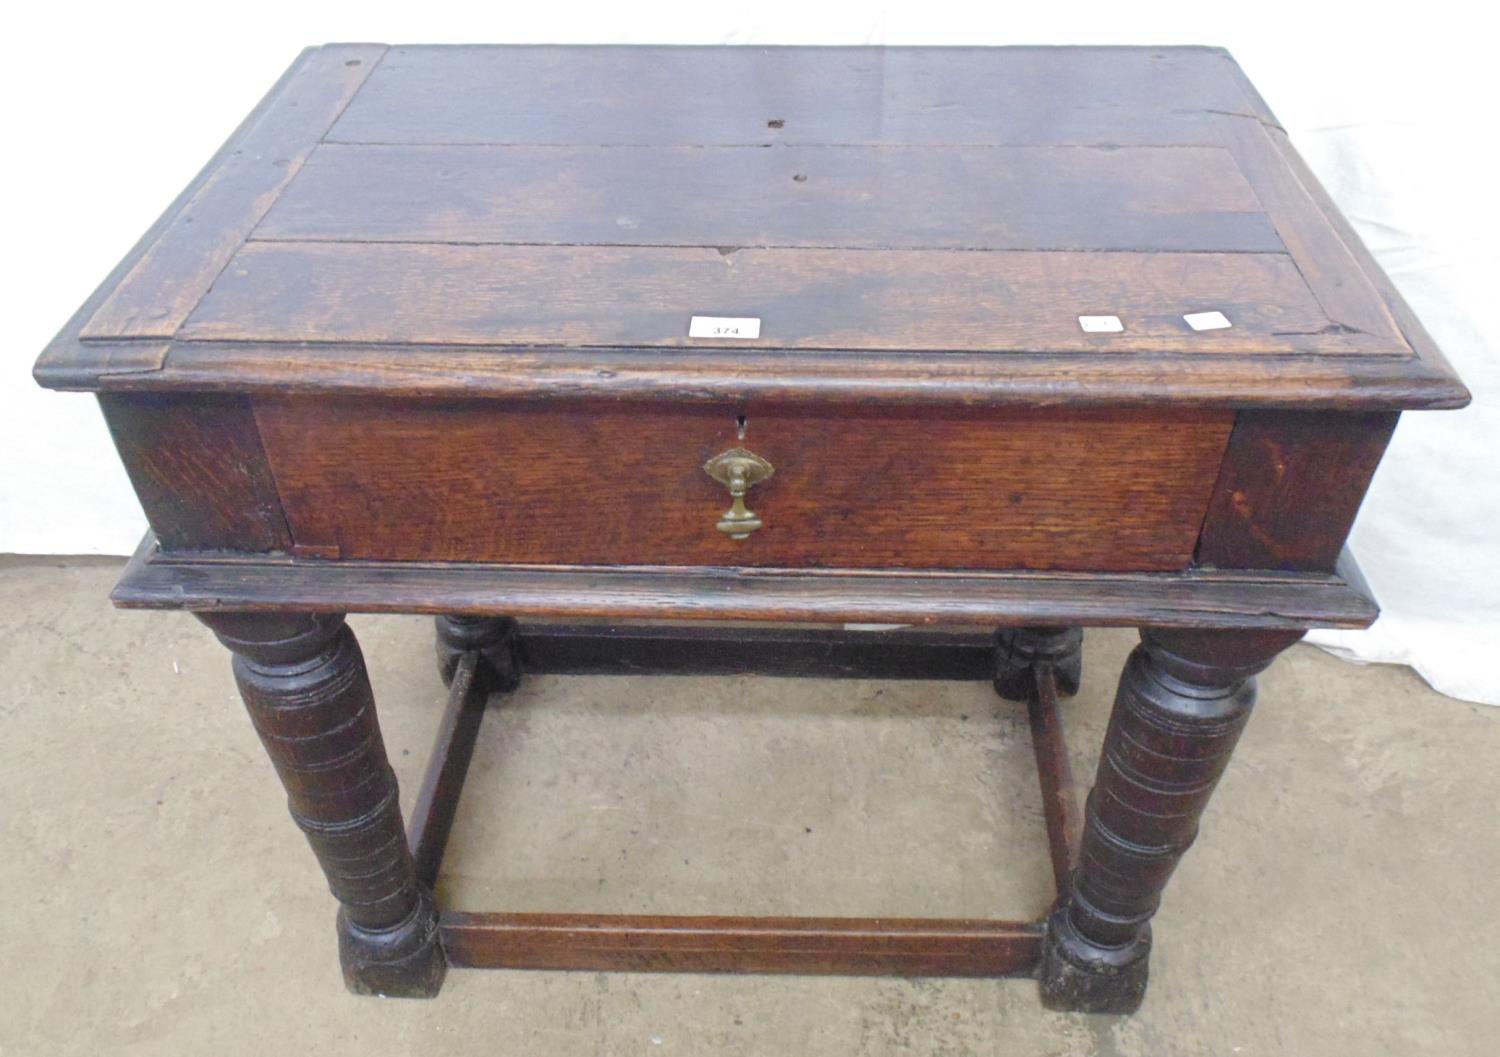 Period oak side table the rectangular top over a single drawer, standing on turned legs with cross